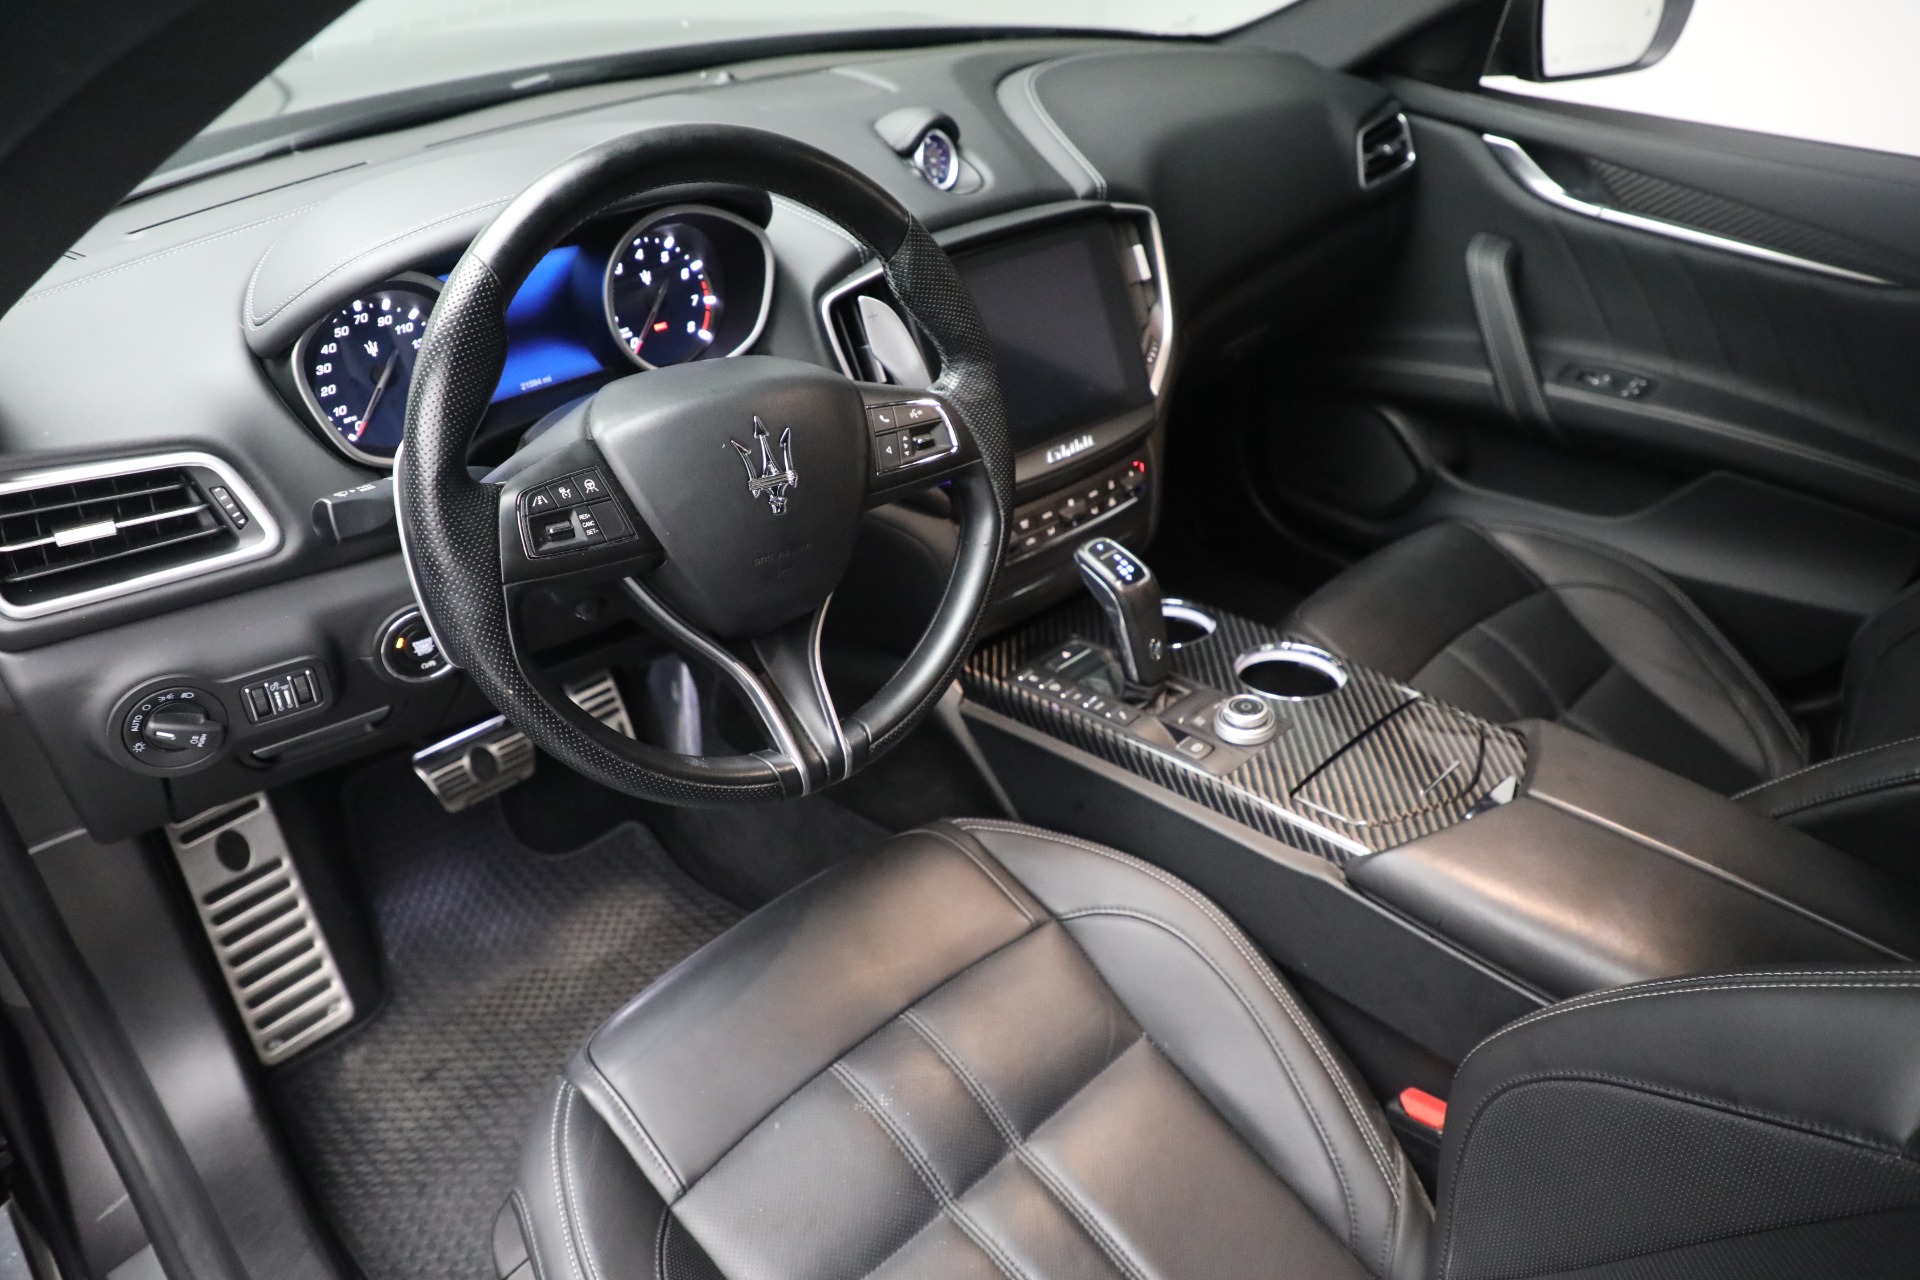 2019 Maserati Ghibli Review Trims Specs Price New Interior Features  Exterior Design and Specifications  CarBuzz